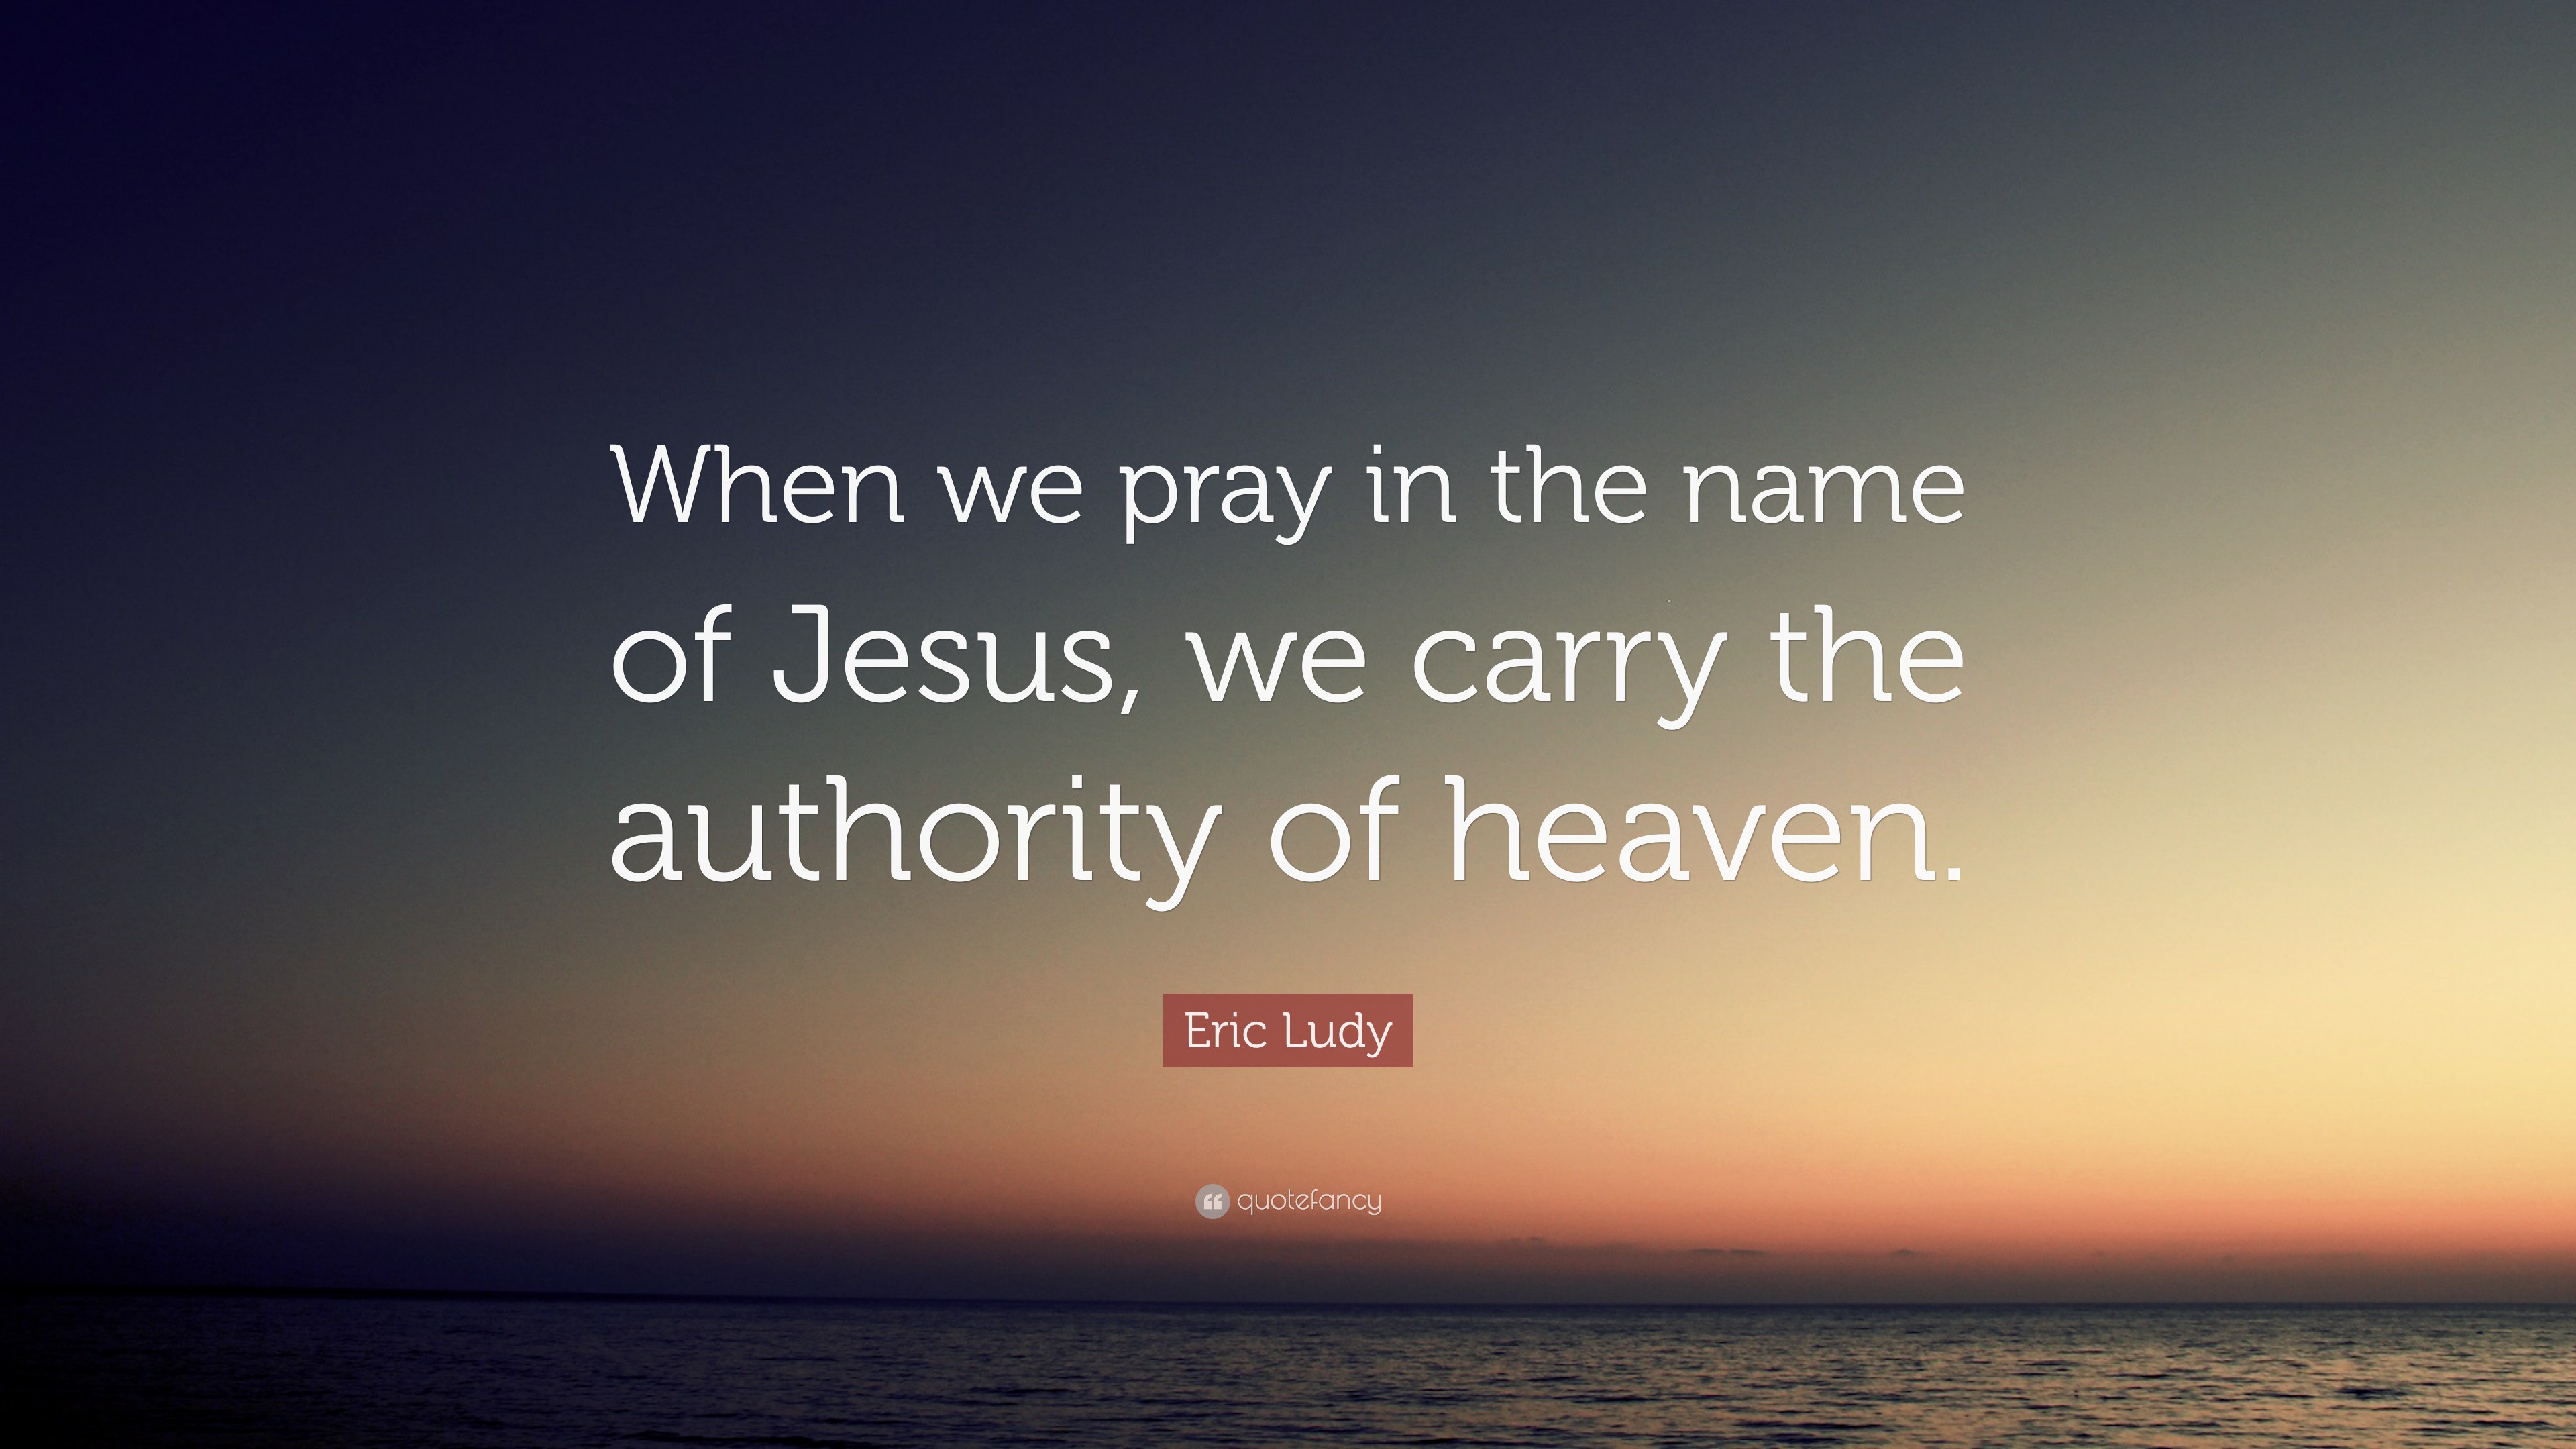 Eric Ludy Quote: “When We Pray In The Name Of Jesus, We Carry The Authority Of